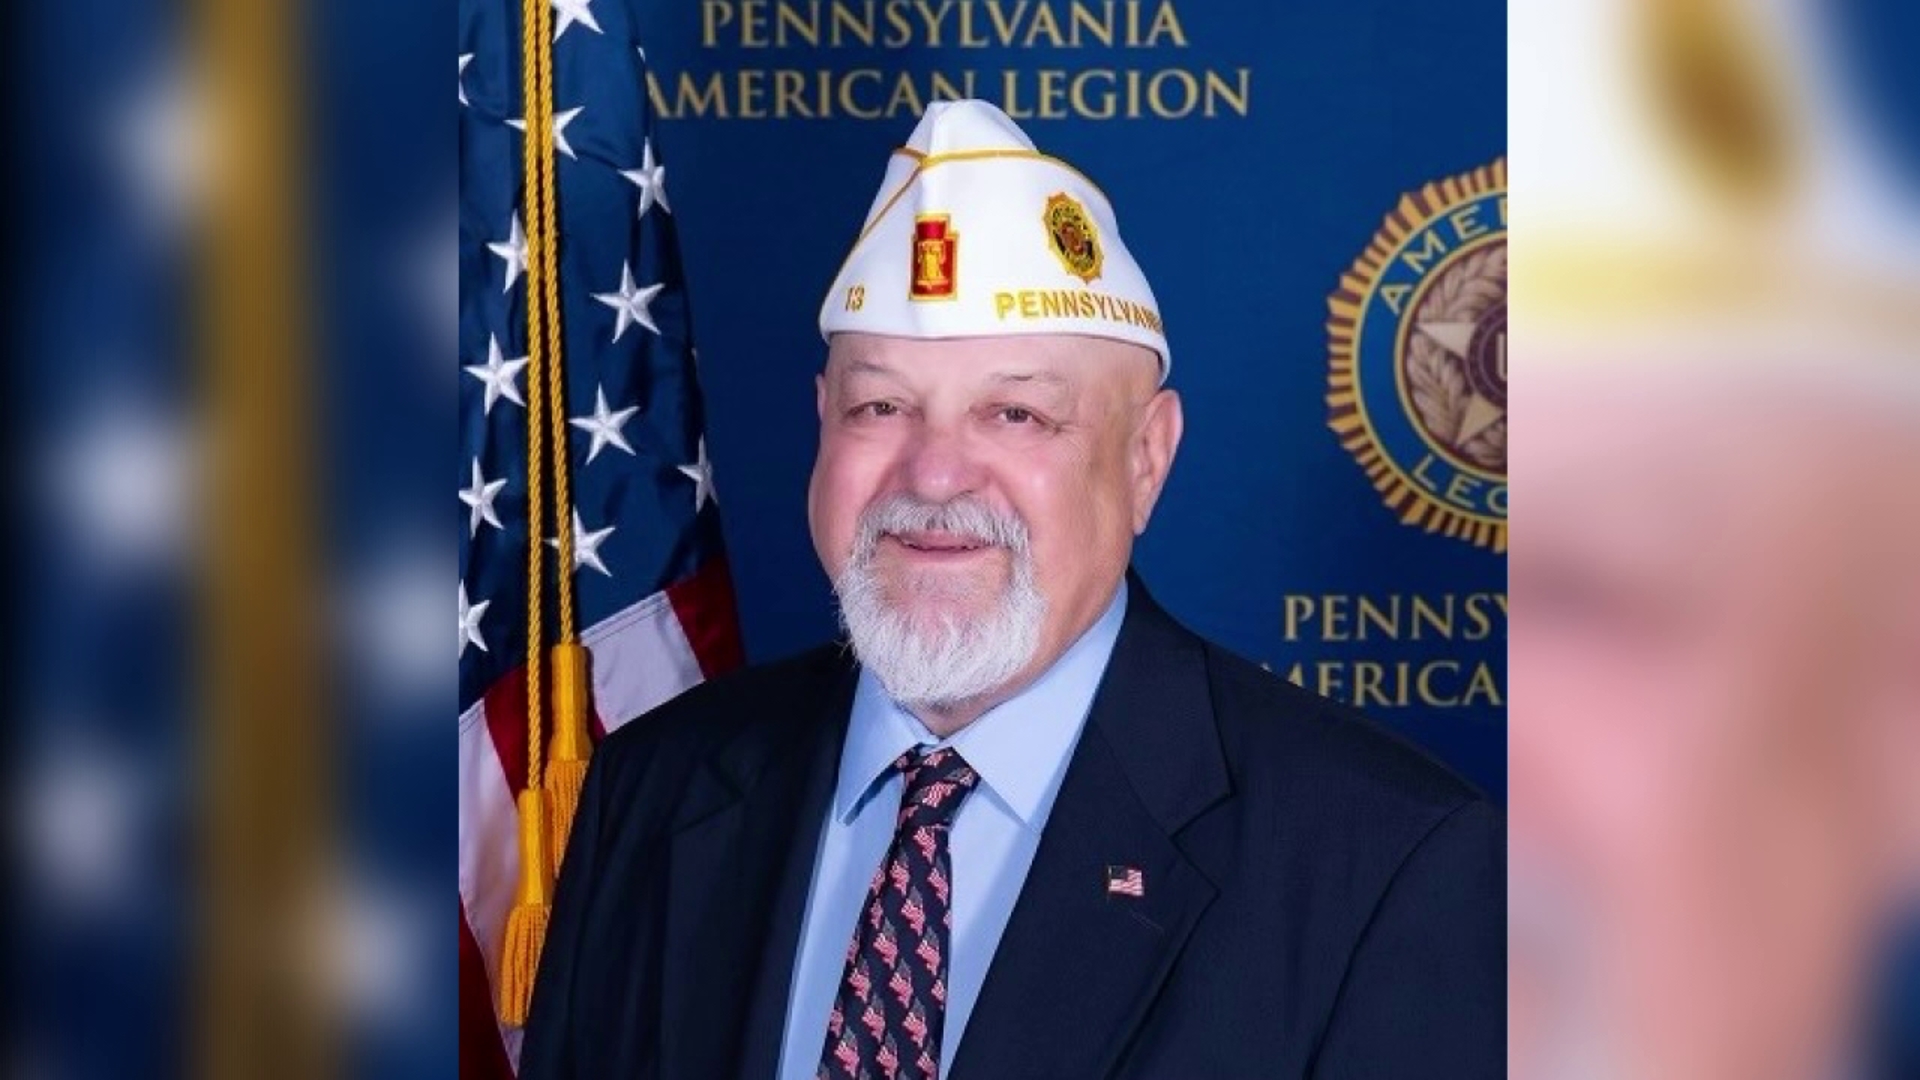 It was a day honoring the life and legacy of the state's top American Legion Commander, Stephen Lavelle.